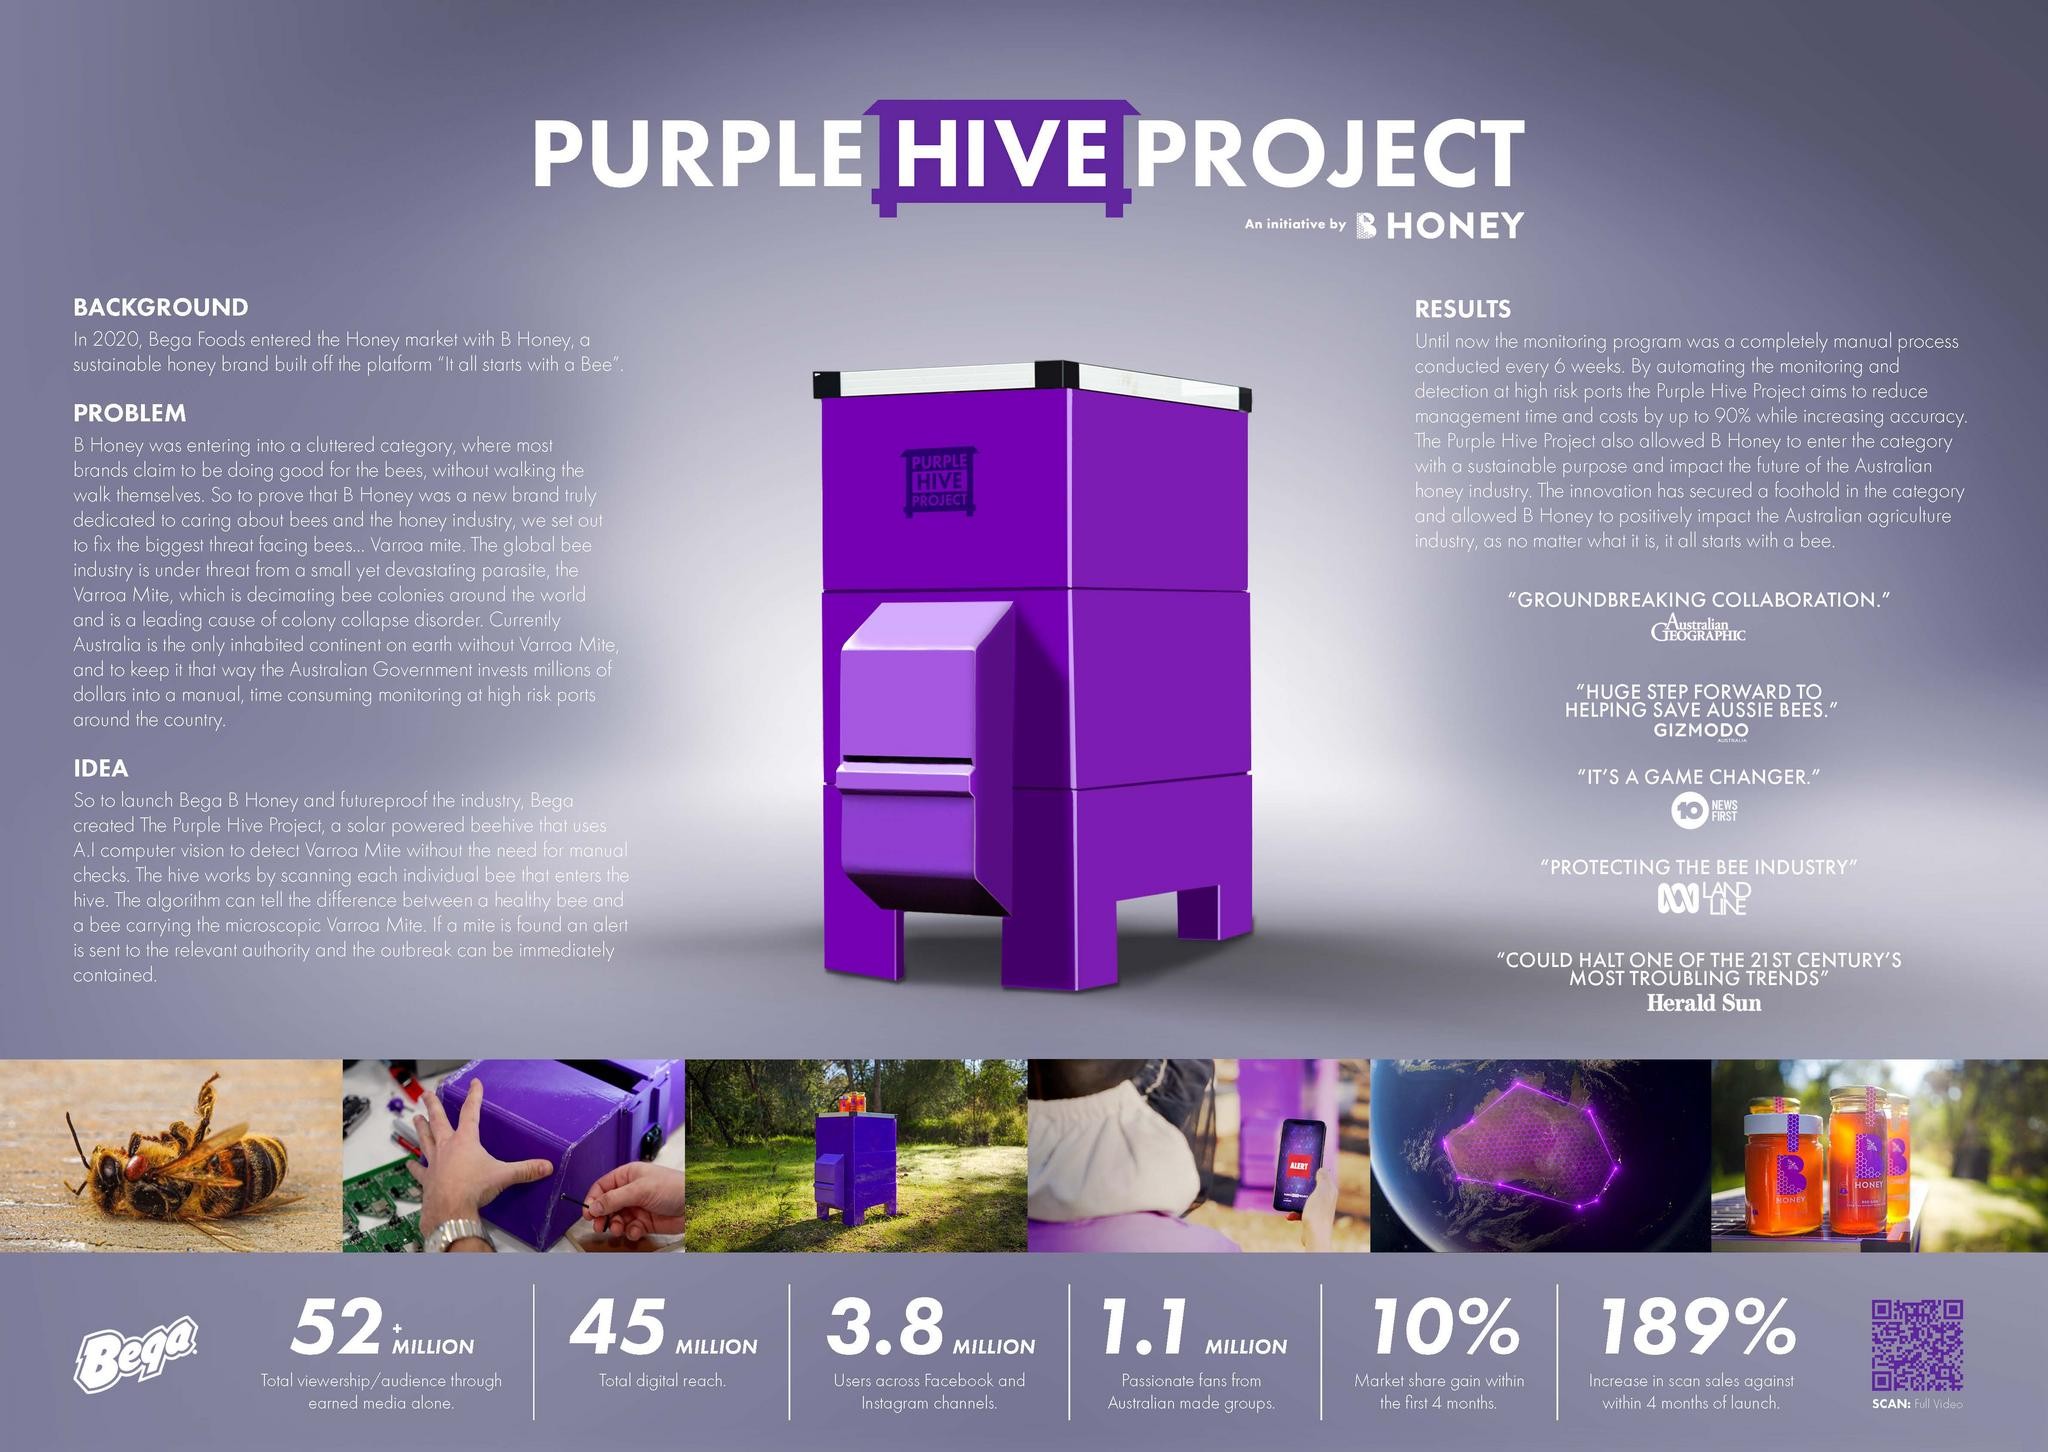 THE PURPLE HIVE PROJECT